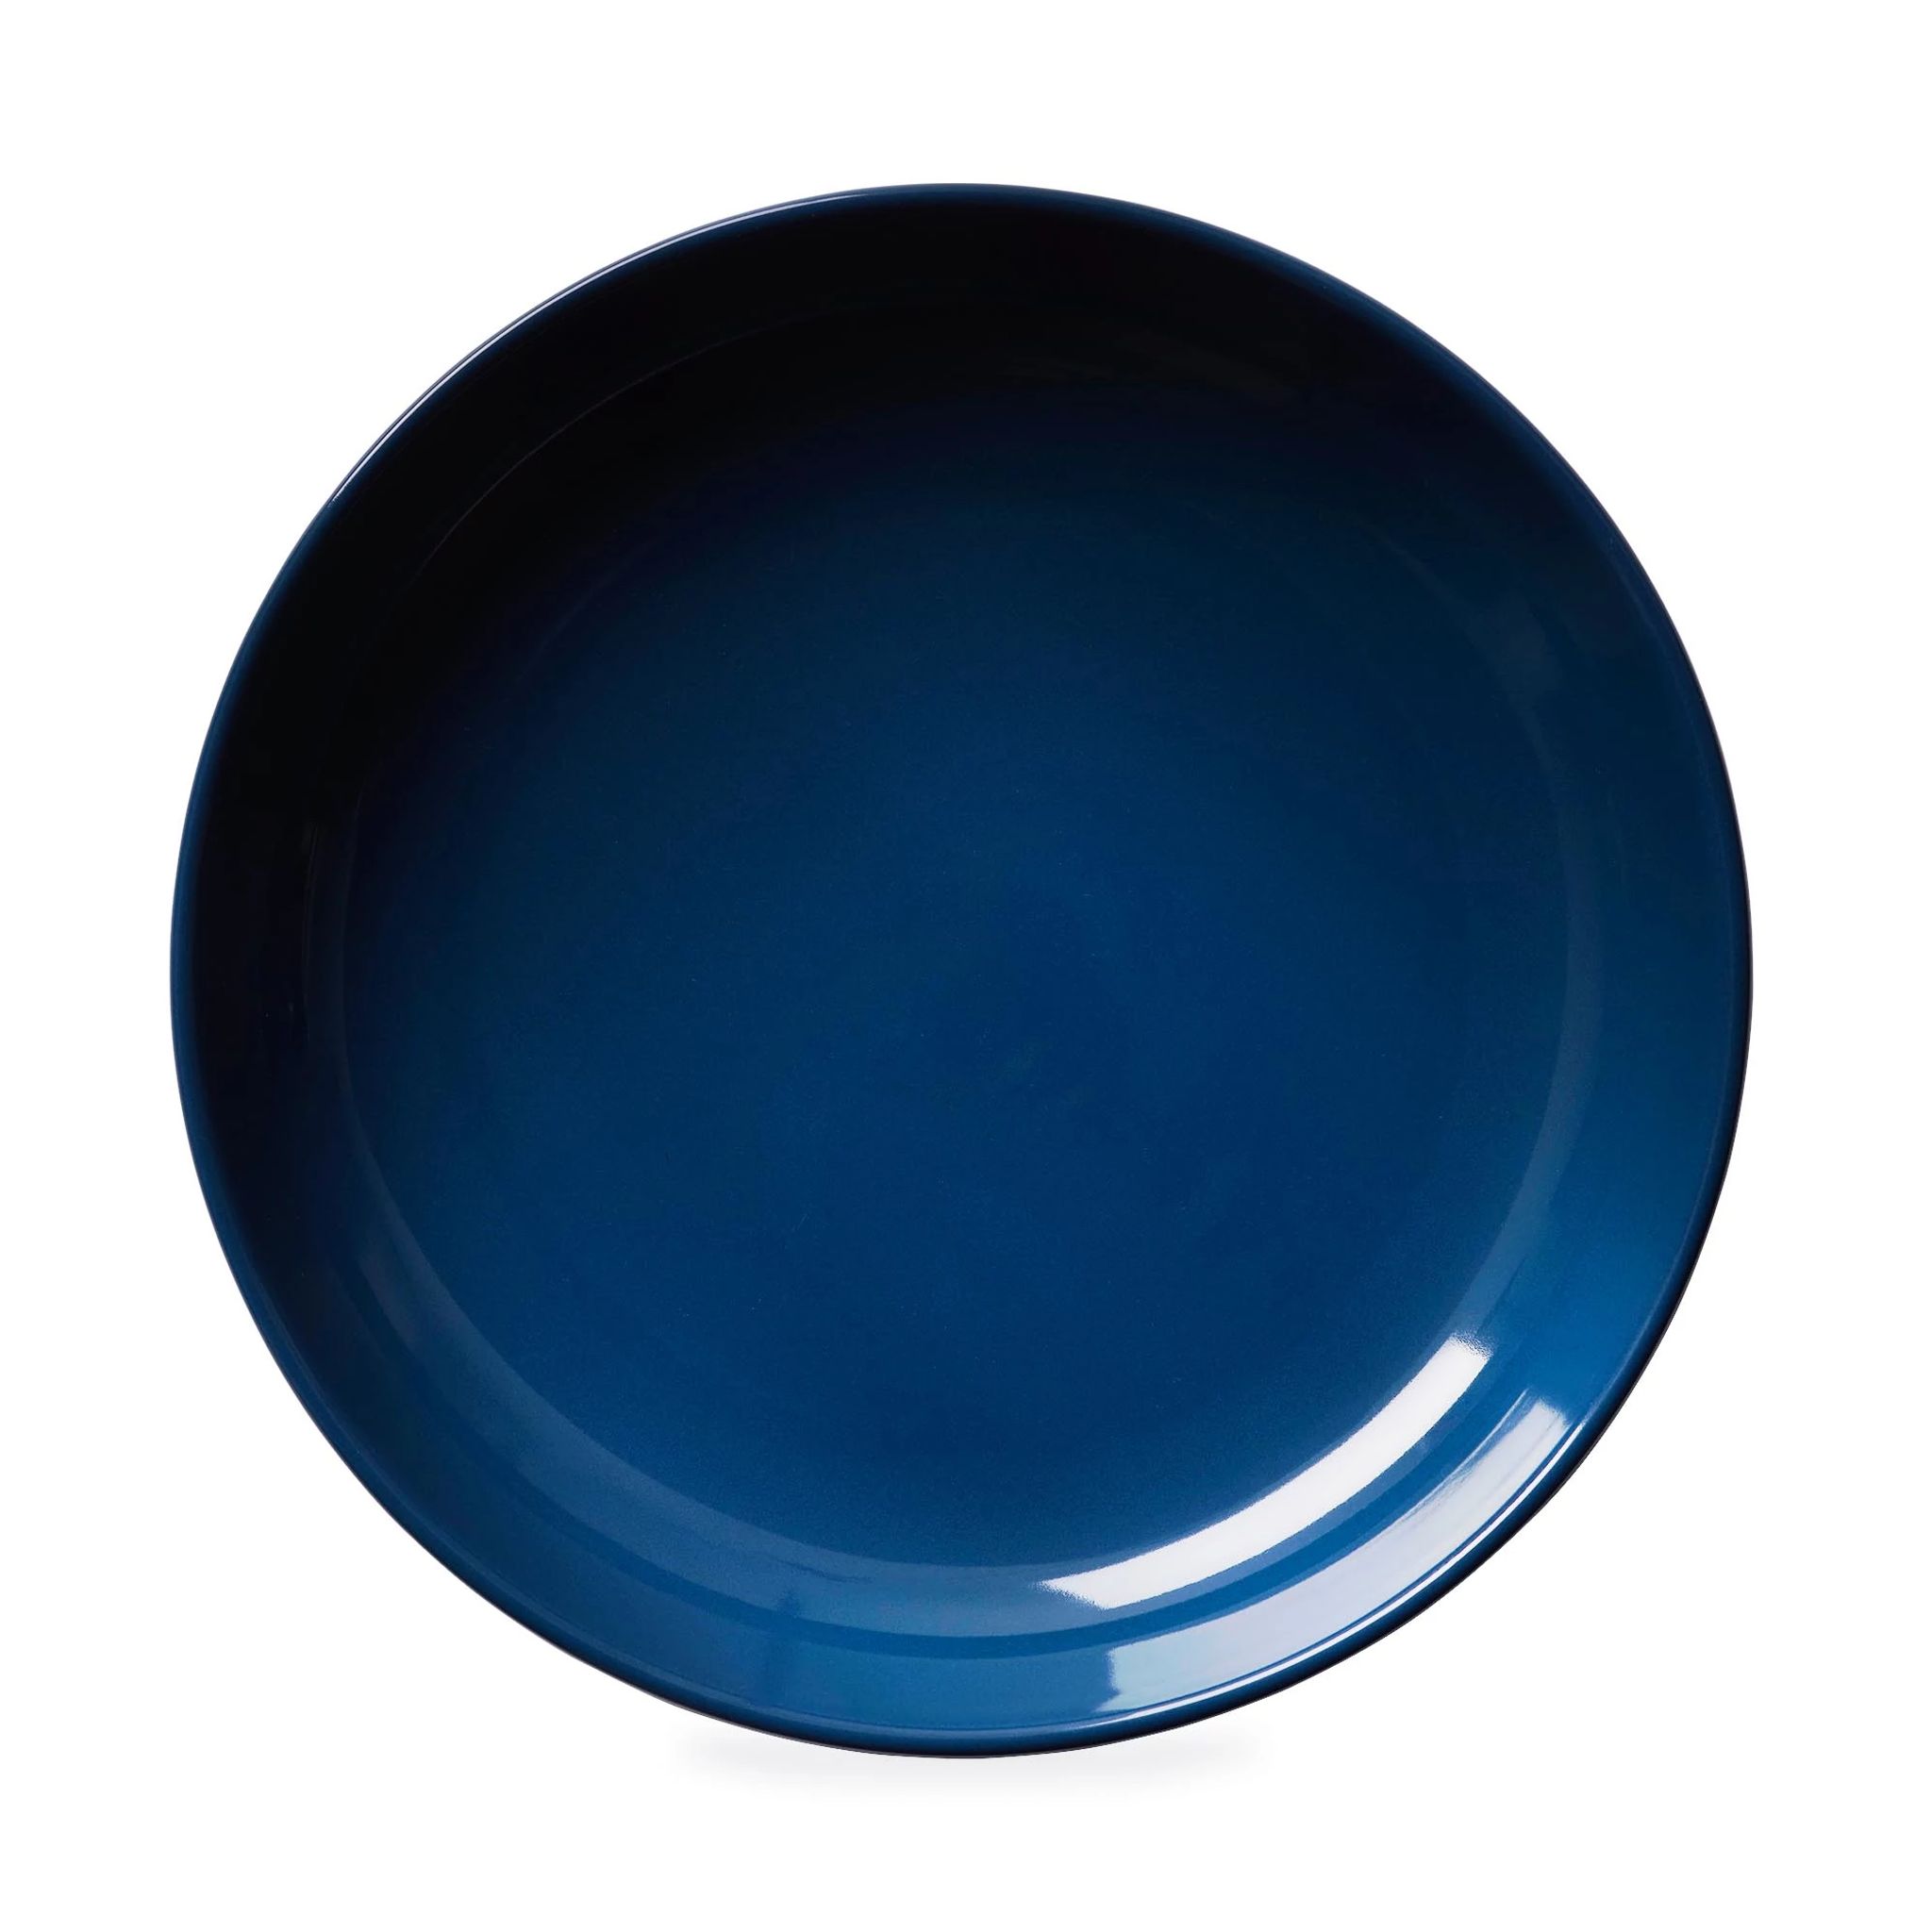 https://embed.widencdn.net/img/worldkitchen/lf64yp1dzx/2048px/CO_1143279_Navy_Meal_Bowl_BTF_Square_Tile3.jpeg